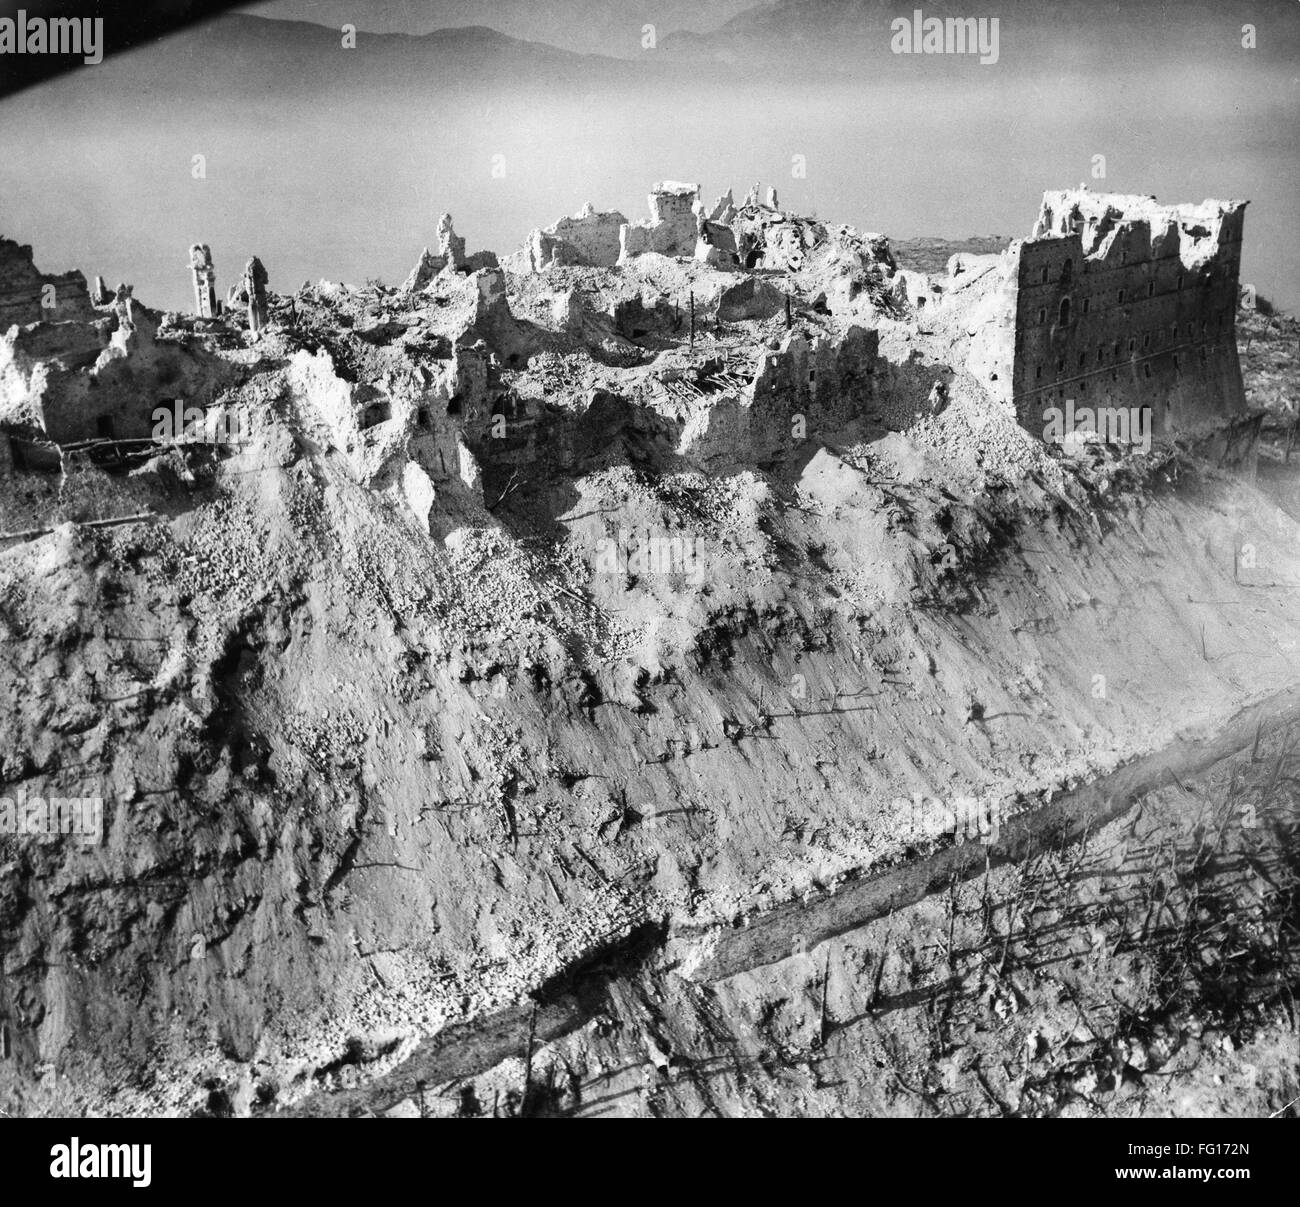 BATTLES FOR MONTE CASSINO Italy 1944 WW2 Photo GROLIER STORY OF AMERICA CARD 